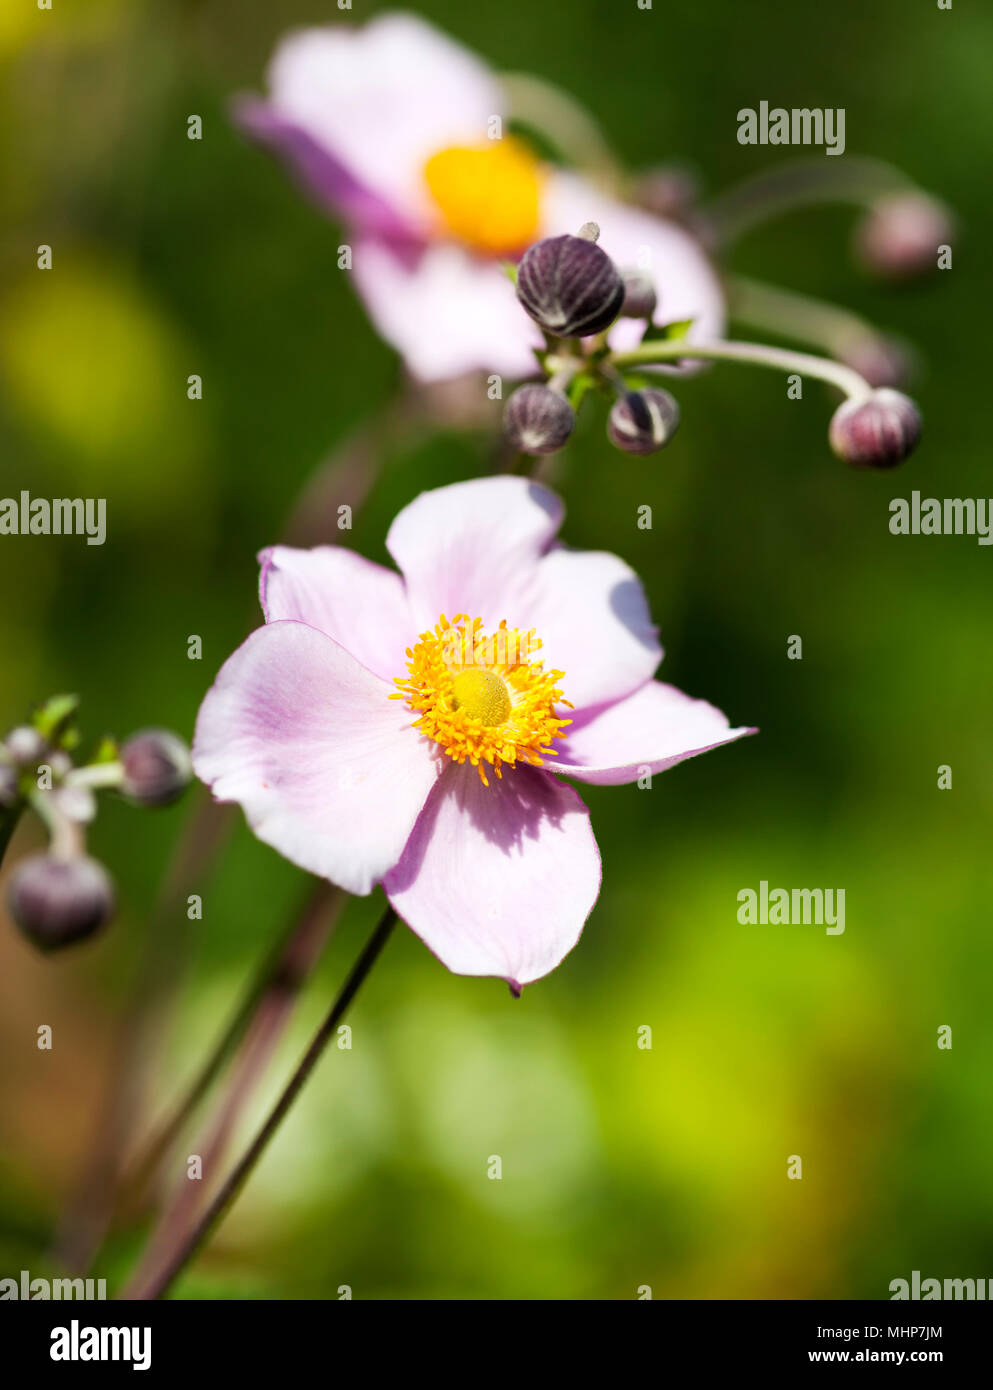 Blooming Anemone hupehensis or Japanese Anemone flower, shallow depzh of field Stock Photo